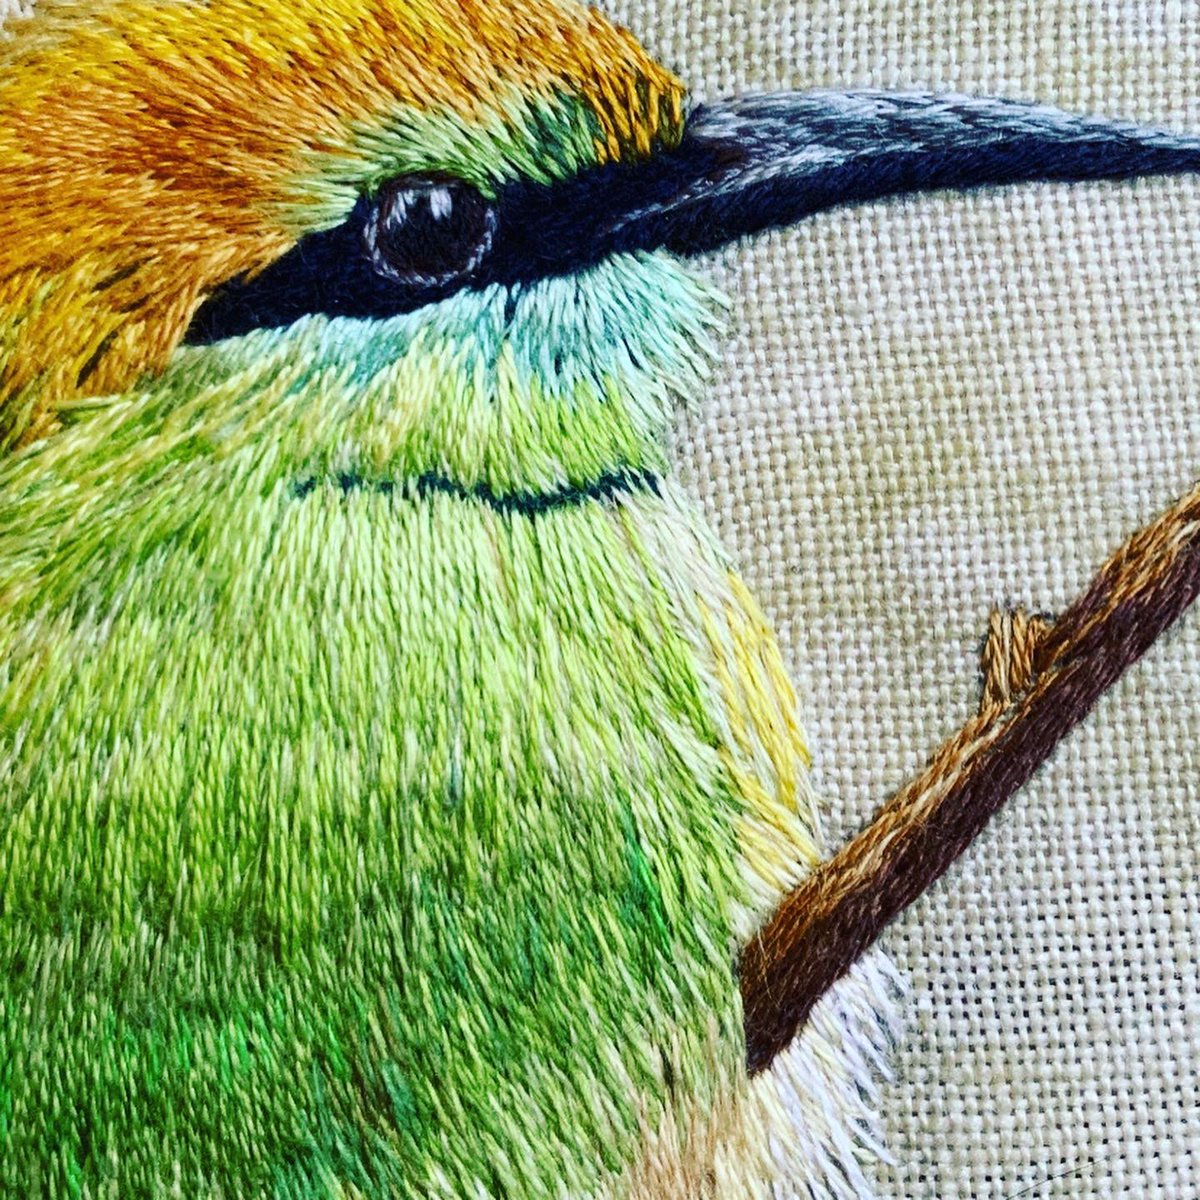 My Little Green Bee Eater embroidery. Hand stitched using Cosmo Stranded Cotton. Took around 50 hours to make. 
Based off picture by basu.rajiv who so kindly allowed me the use of his amazing photograph.
#Handmade #embroidery #Stitch #birdslover #needlepainting